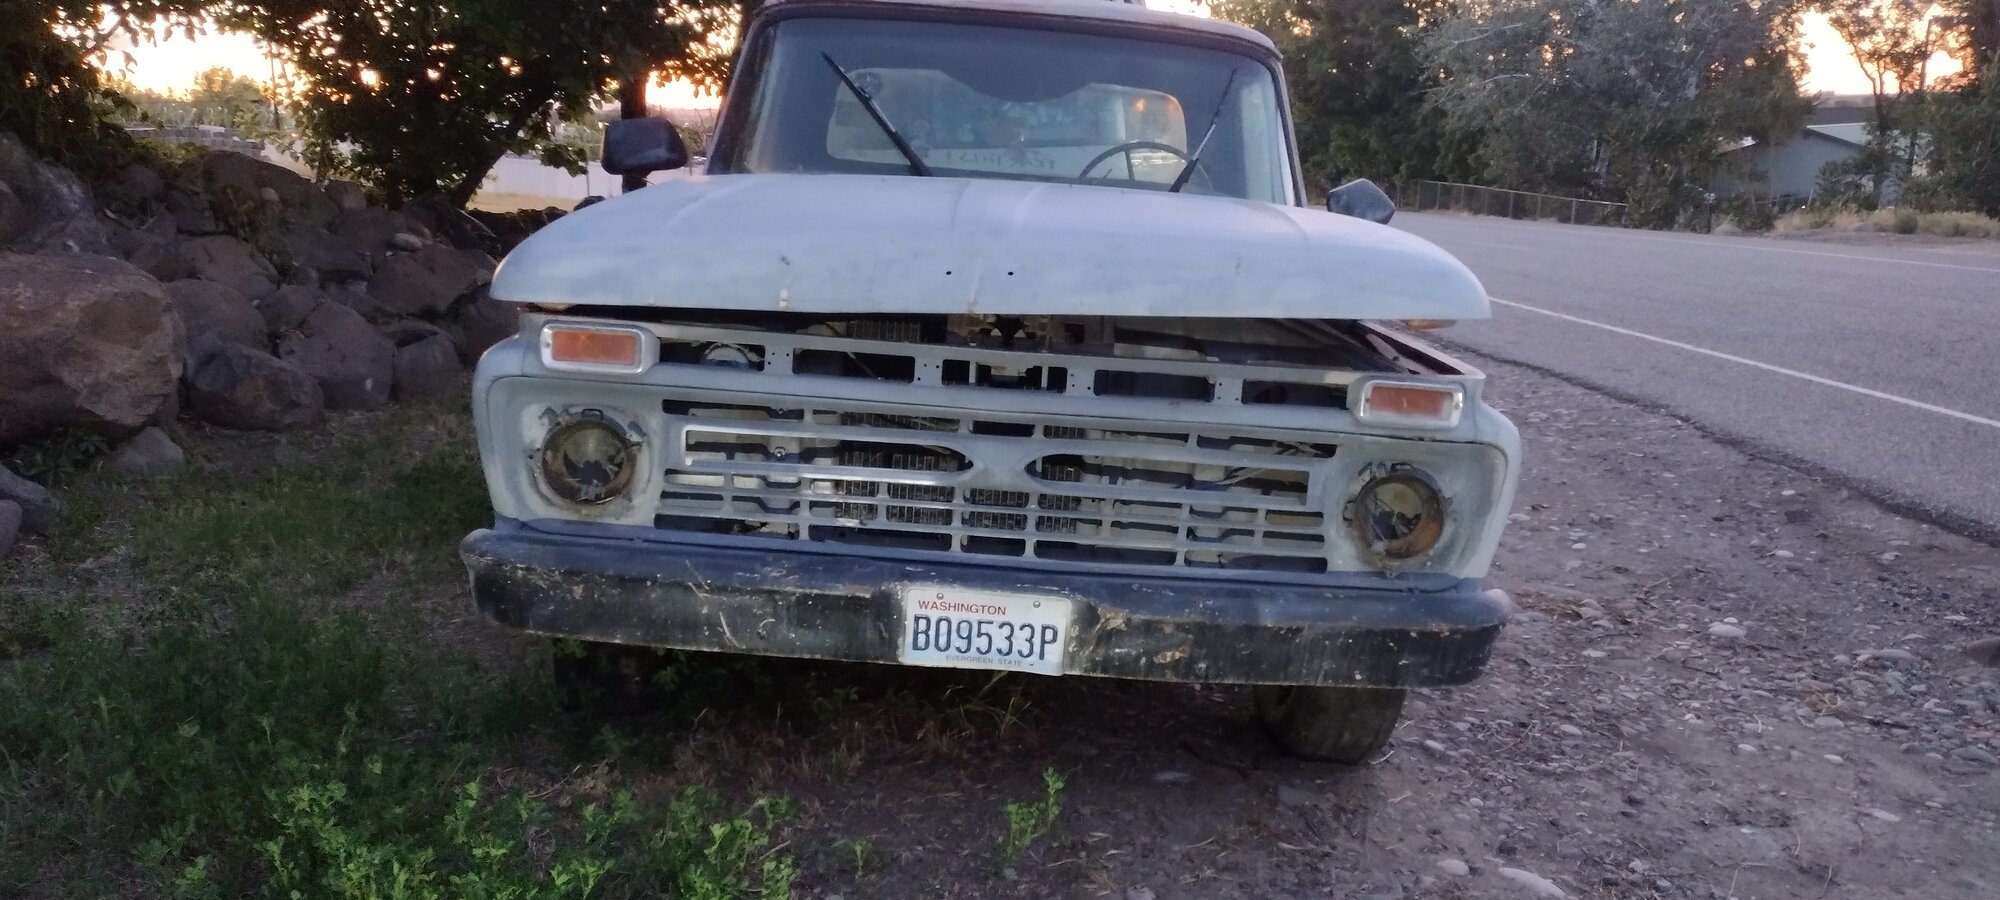 1966 Ford F100 - Old gray lady - $1,000 (Richland) © craigslist Street Truck -  Ford Truck Profile